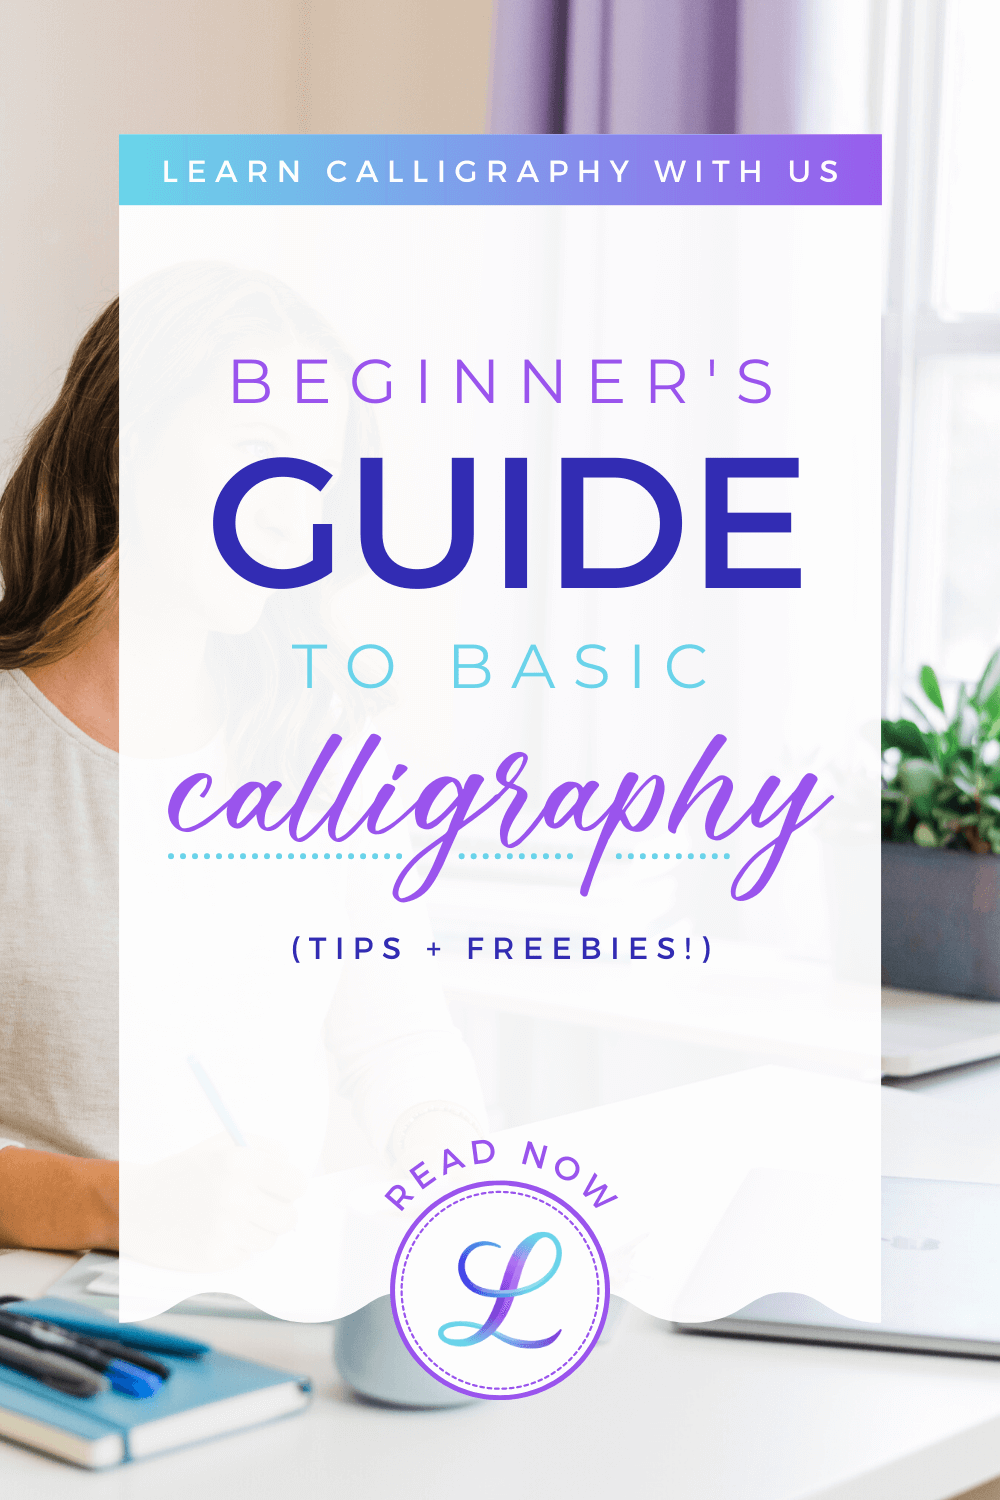 What Is Calligraphy? How to Learn Calligraphy for Beginners